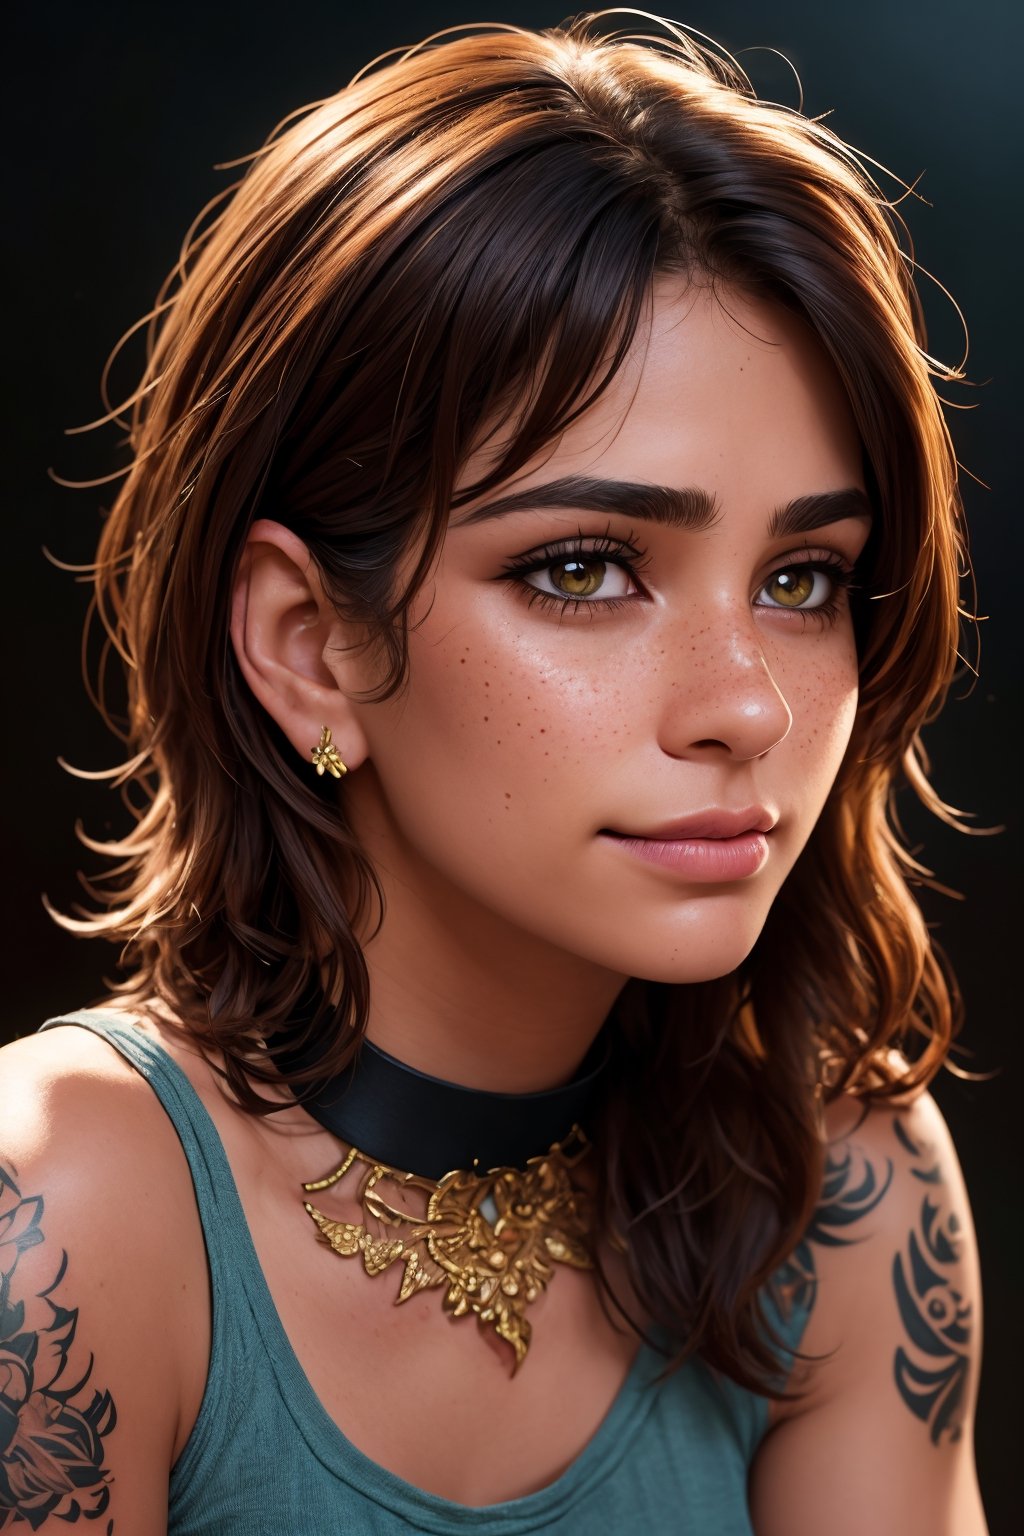 photo, rule of thirds, dramatic lighting, medium hair, detailed face, detailed nose, woman wearing tank top, freckles, collar or choker, smirk, tattoo, intricate background
,realism,realistic,raw,analog,woman,portrait,photorealistic,analog,realism,Indian ,Pakistani 